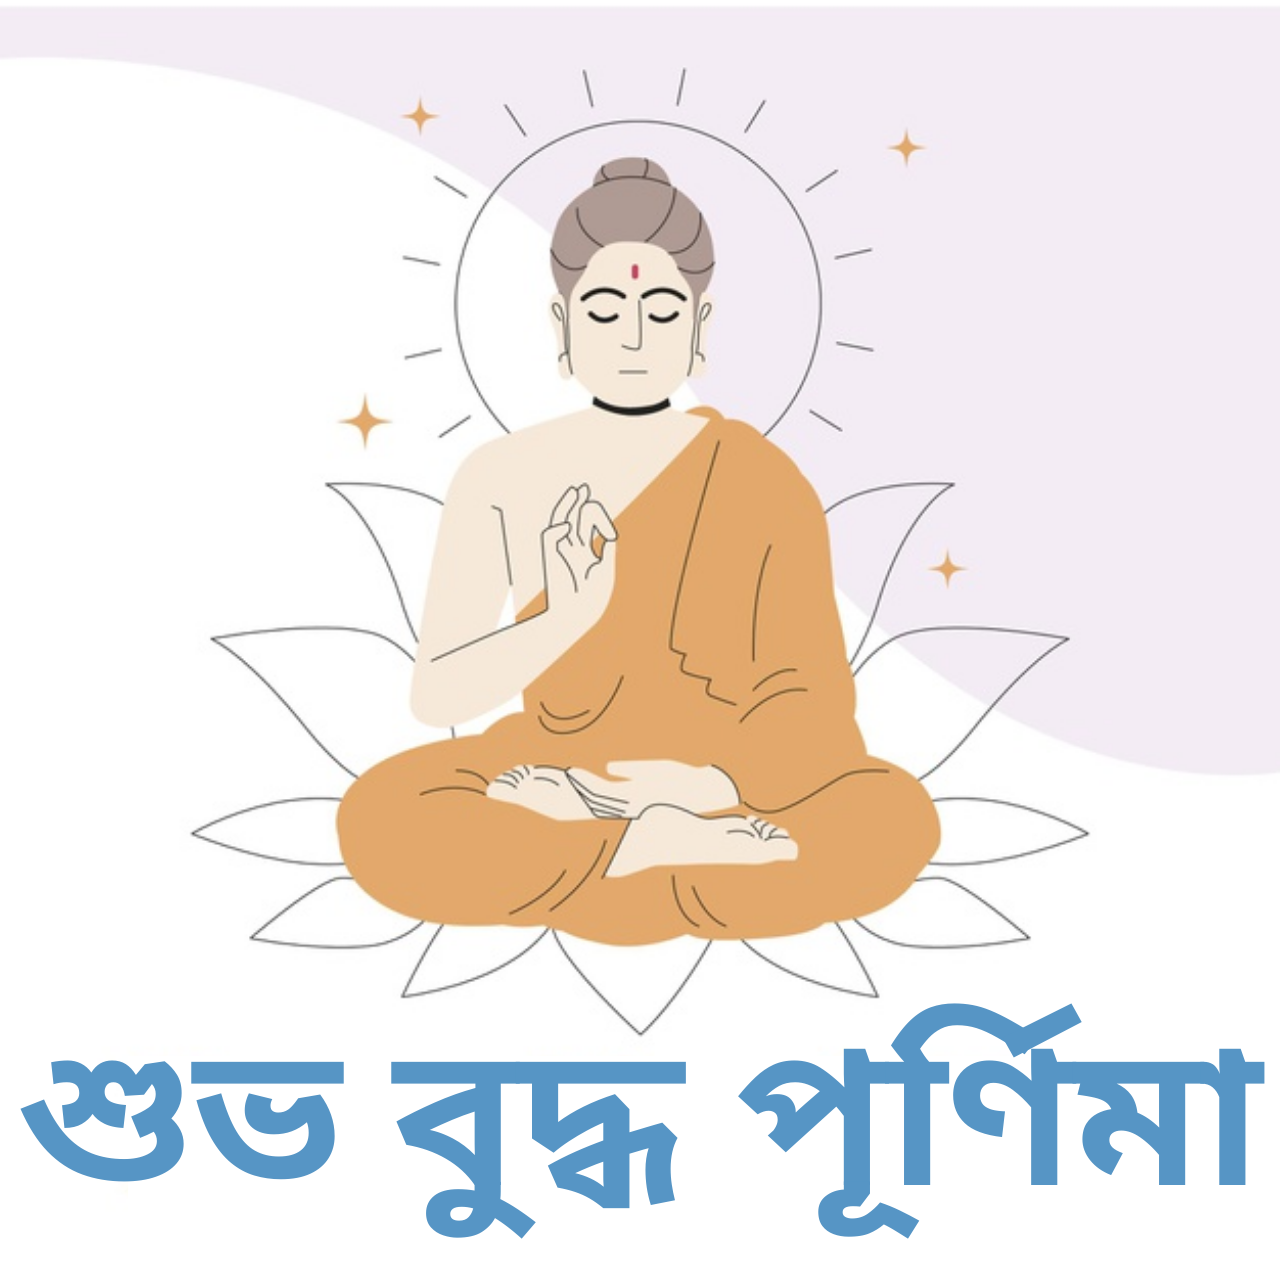 Buddha Purnima 2021: Bengali and Tamil Wishes, HD Images, Greetings, Quotes, Status, and WhatsApp Messages to Share for Vesak Day